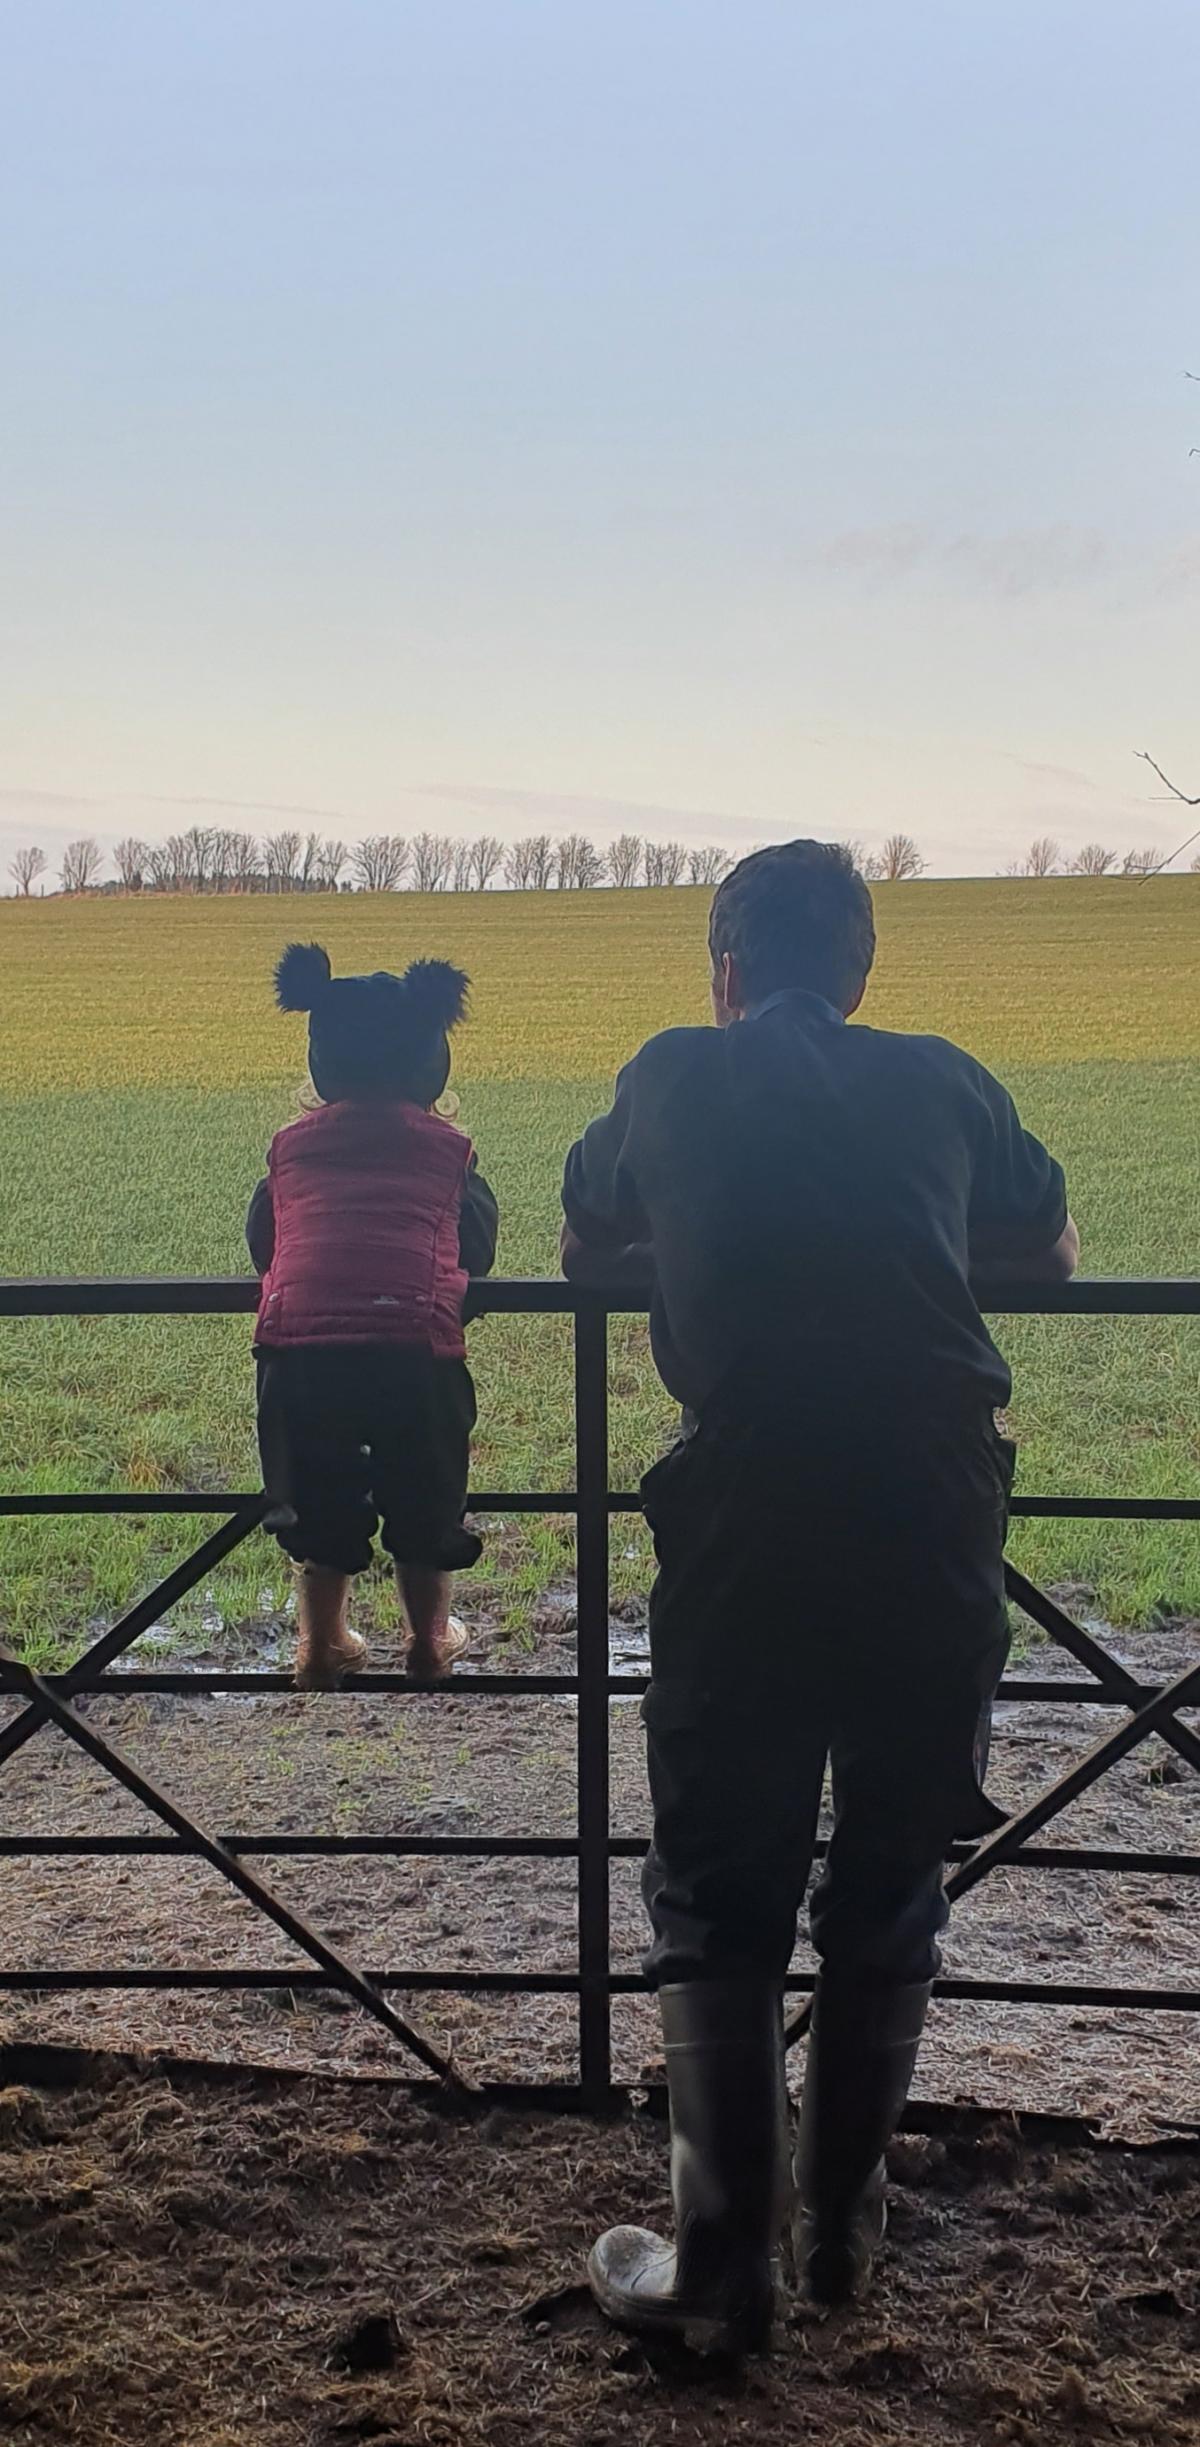 Jenna Carmichael - My husband Sam Carmichael & daughter Esther Carmichael enjoying the view after feeding some of our cattle